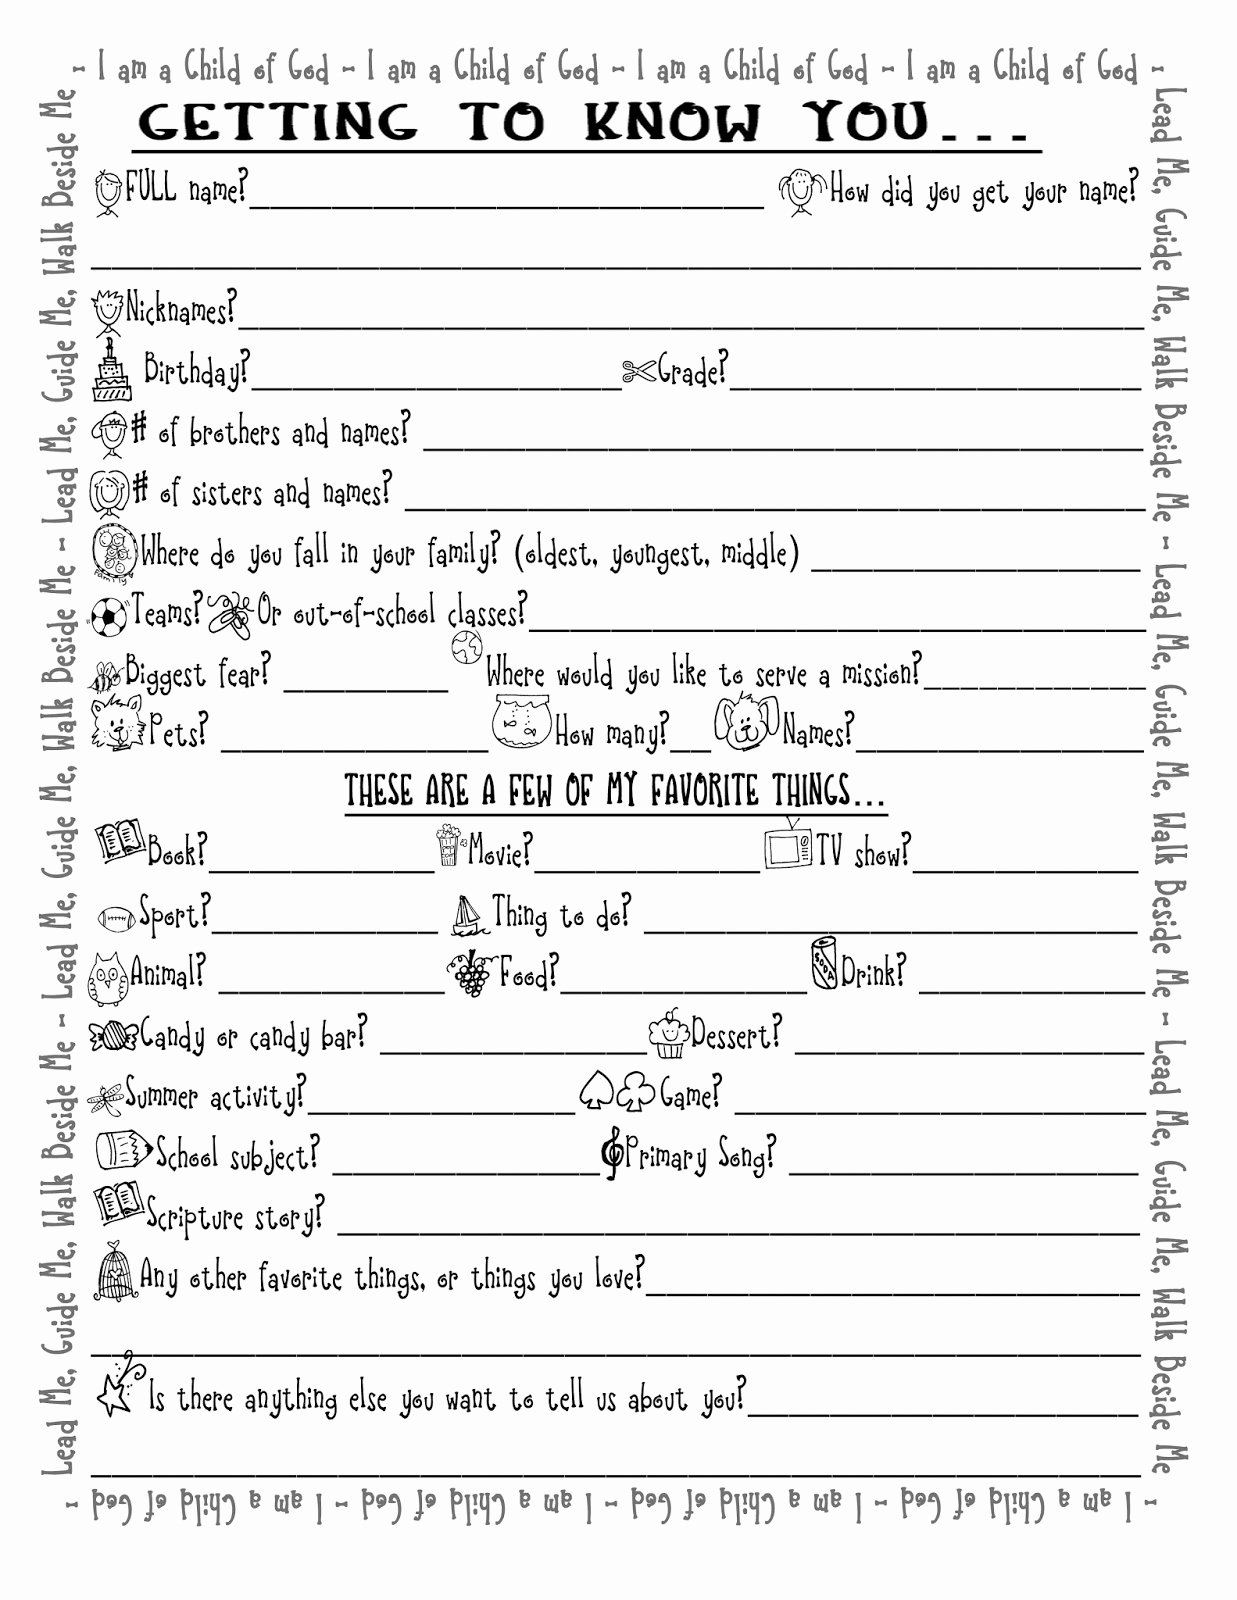 Getting to Know You Worksheet Best Of 13 Best Of Get to Know Me Worksheet Get to Know